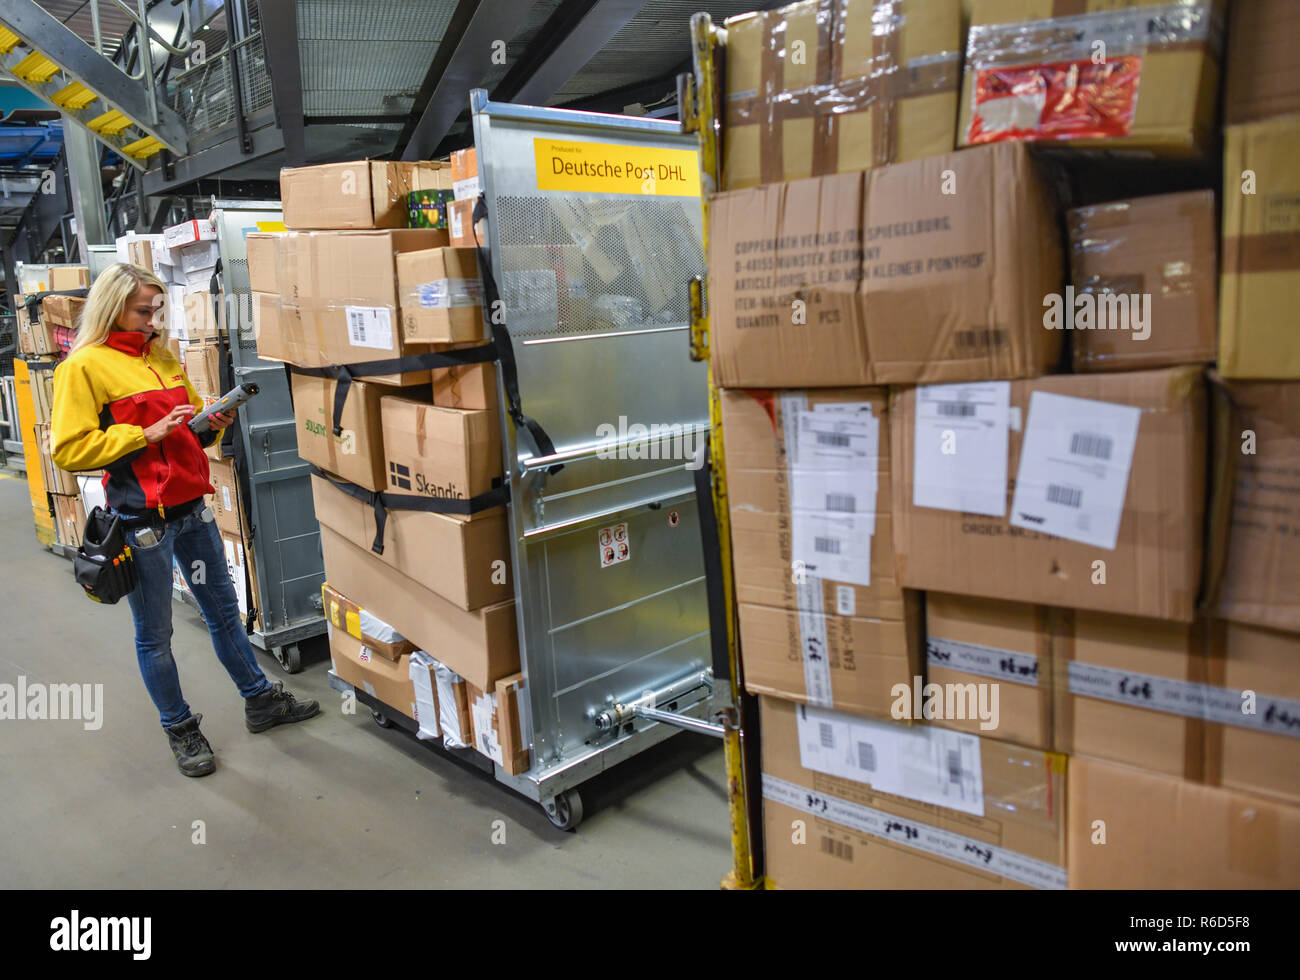 05 December 2018, Brandenburg, Rüdersdorf: Sandra Heller, employee at the DHL-Paketzentrum, checks parcels on a transport trolley. Let's get on with the parcels and packages: For the employees of parcel centres, it's time to roll up their sleeves again. For example at the DHL location in Rüdersdorf, Brandenburg (Märkisch-Oderland). Up to 550,000 parcels are processed here every day before Christmas. This year, the volume of consignments is again around ten percent higher than in the previous year. Photo: Patrick Pleul/dpa-Zentralbild/ZB Stock Photo